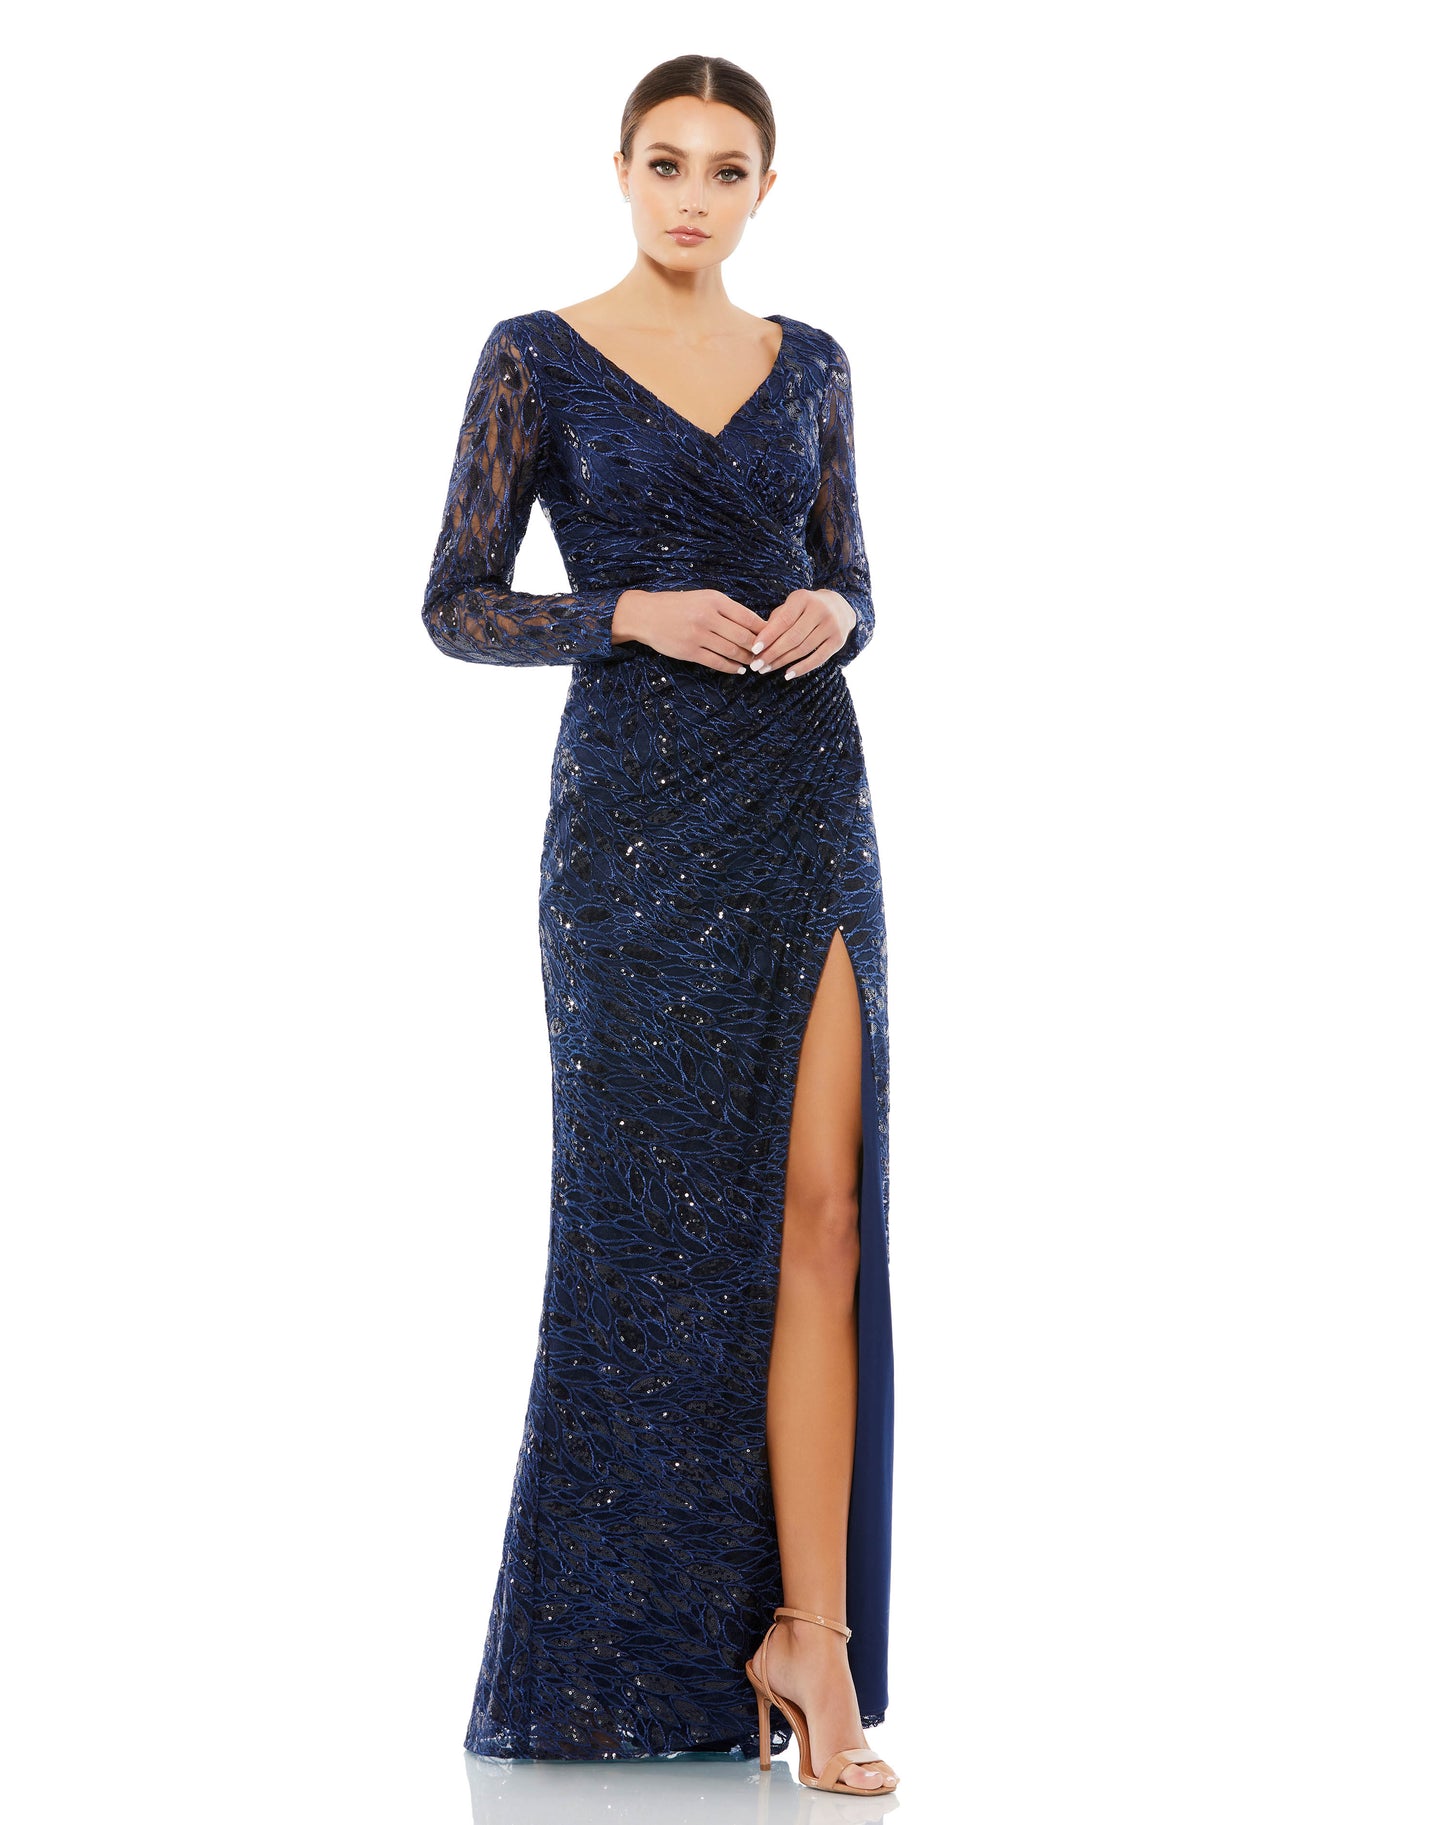 Sequined lace long-sleeve evening gown with flattering ruching at the waist and a thigh-high slit. Mac Duggal Fully Lined Back Zipper 100% Polyester Long Sleeve Full Length V-Neck Style #12412